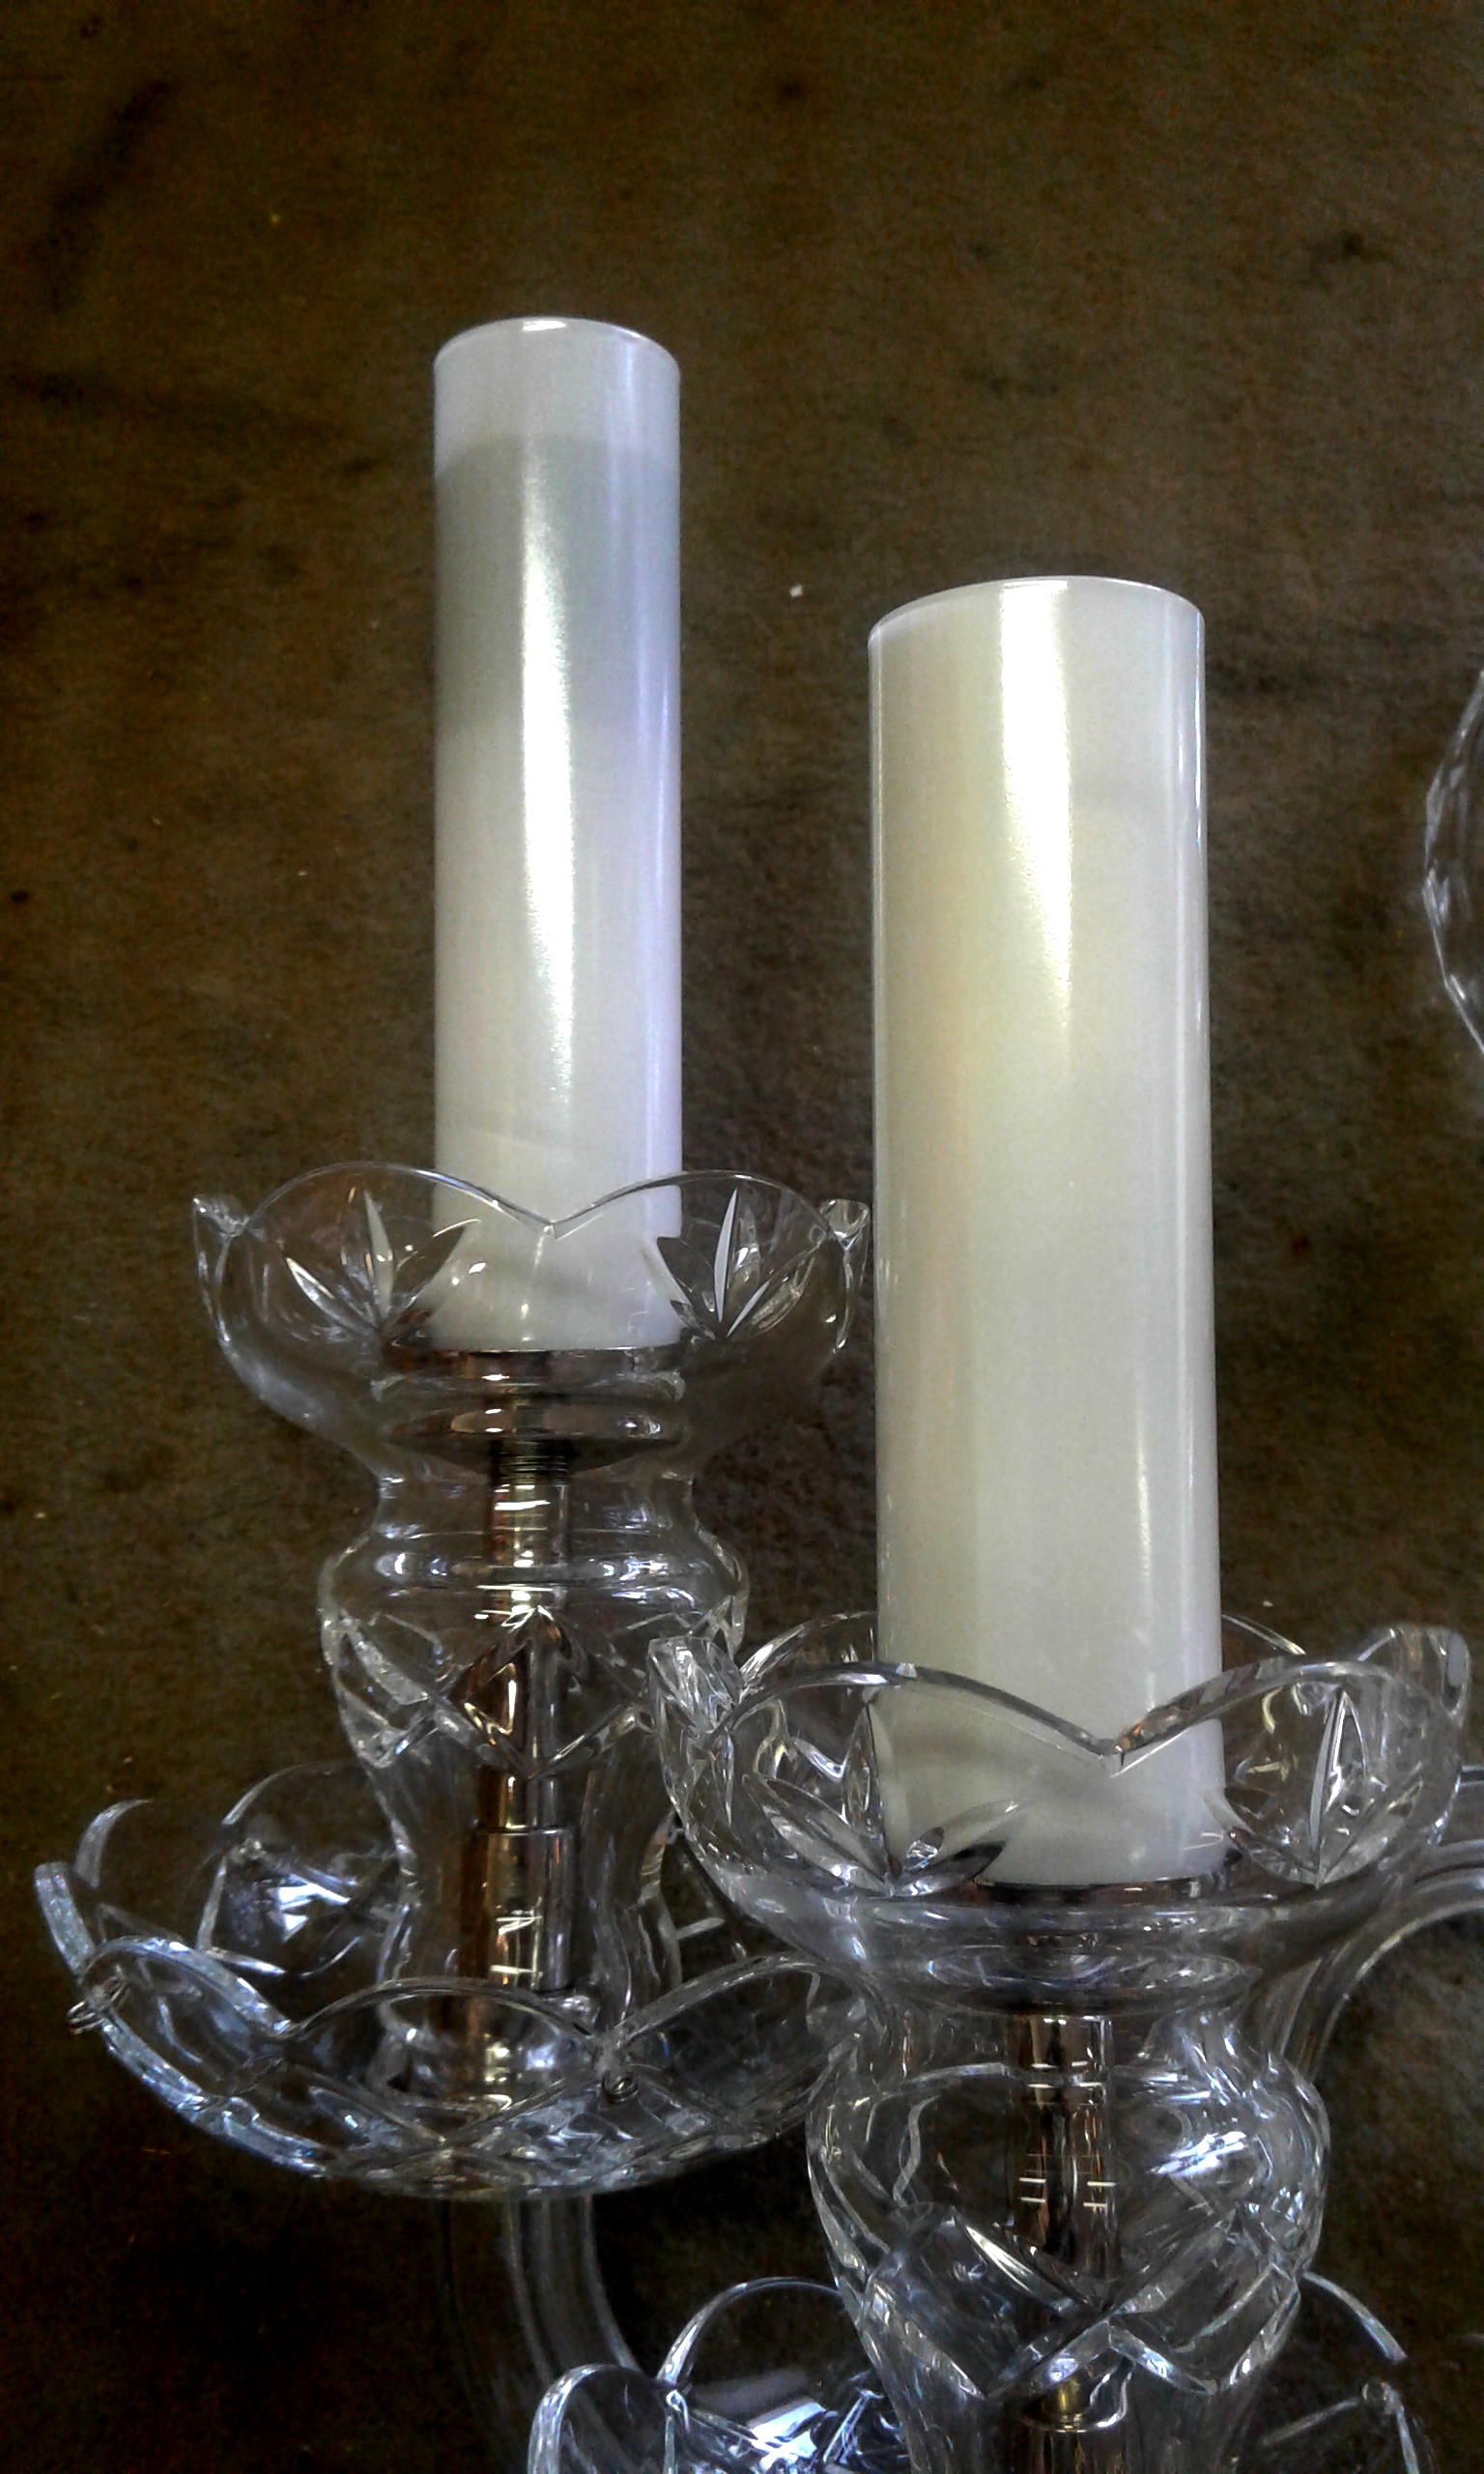 The milk glass covering tubes - optional dia 28 or 32 mm